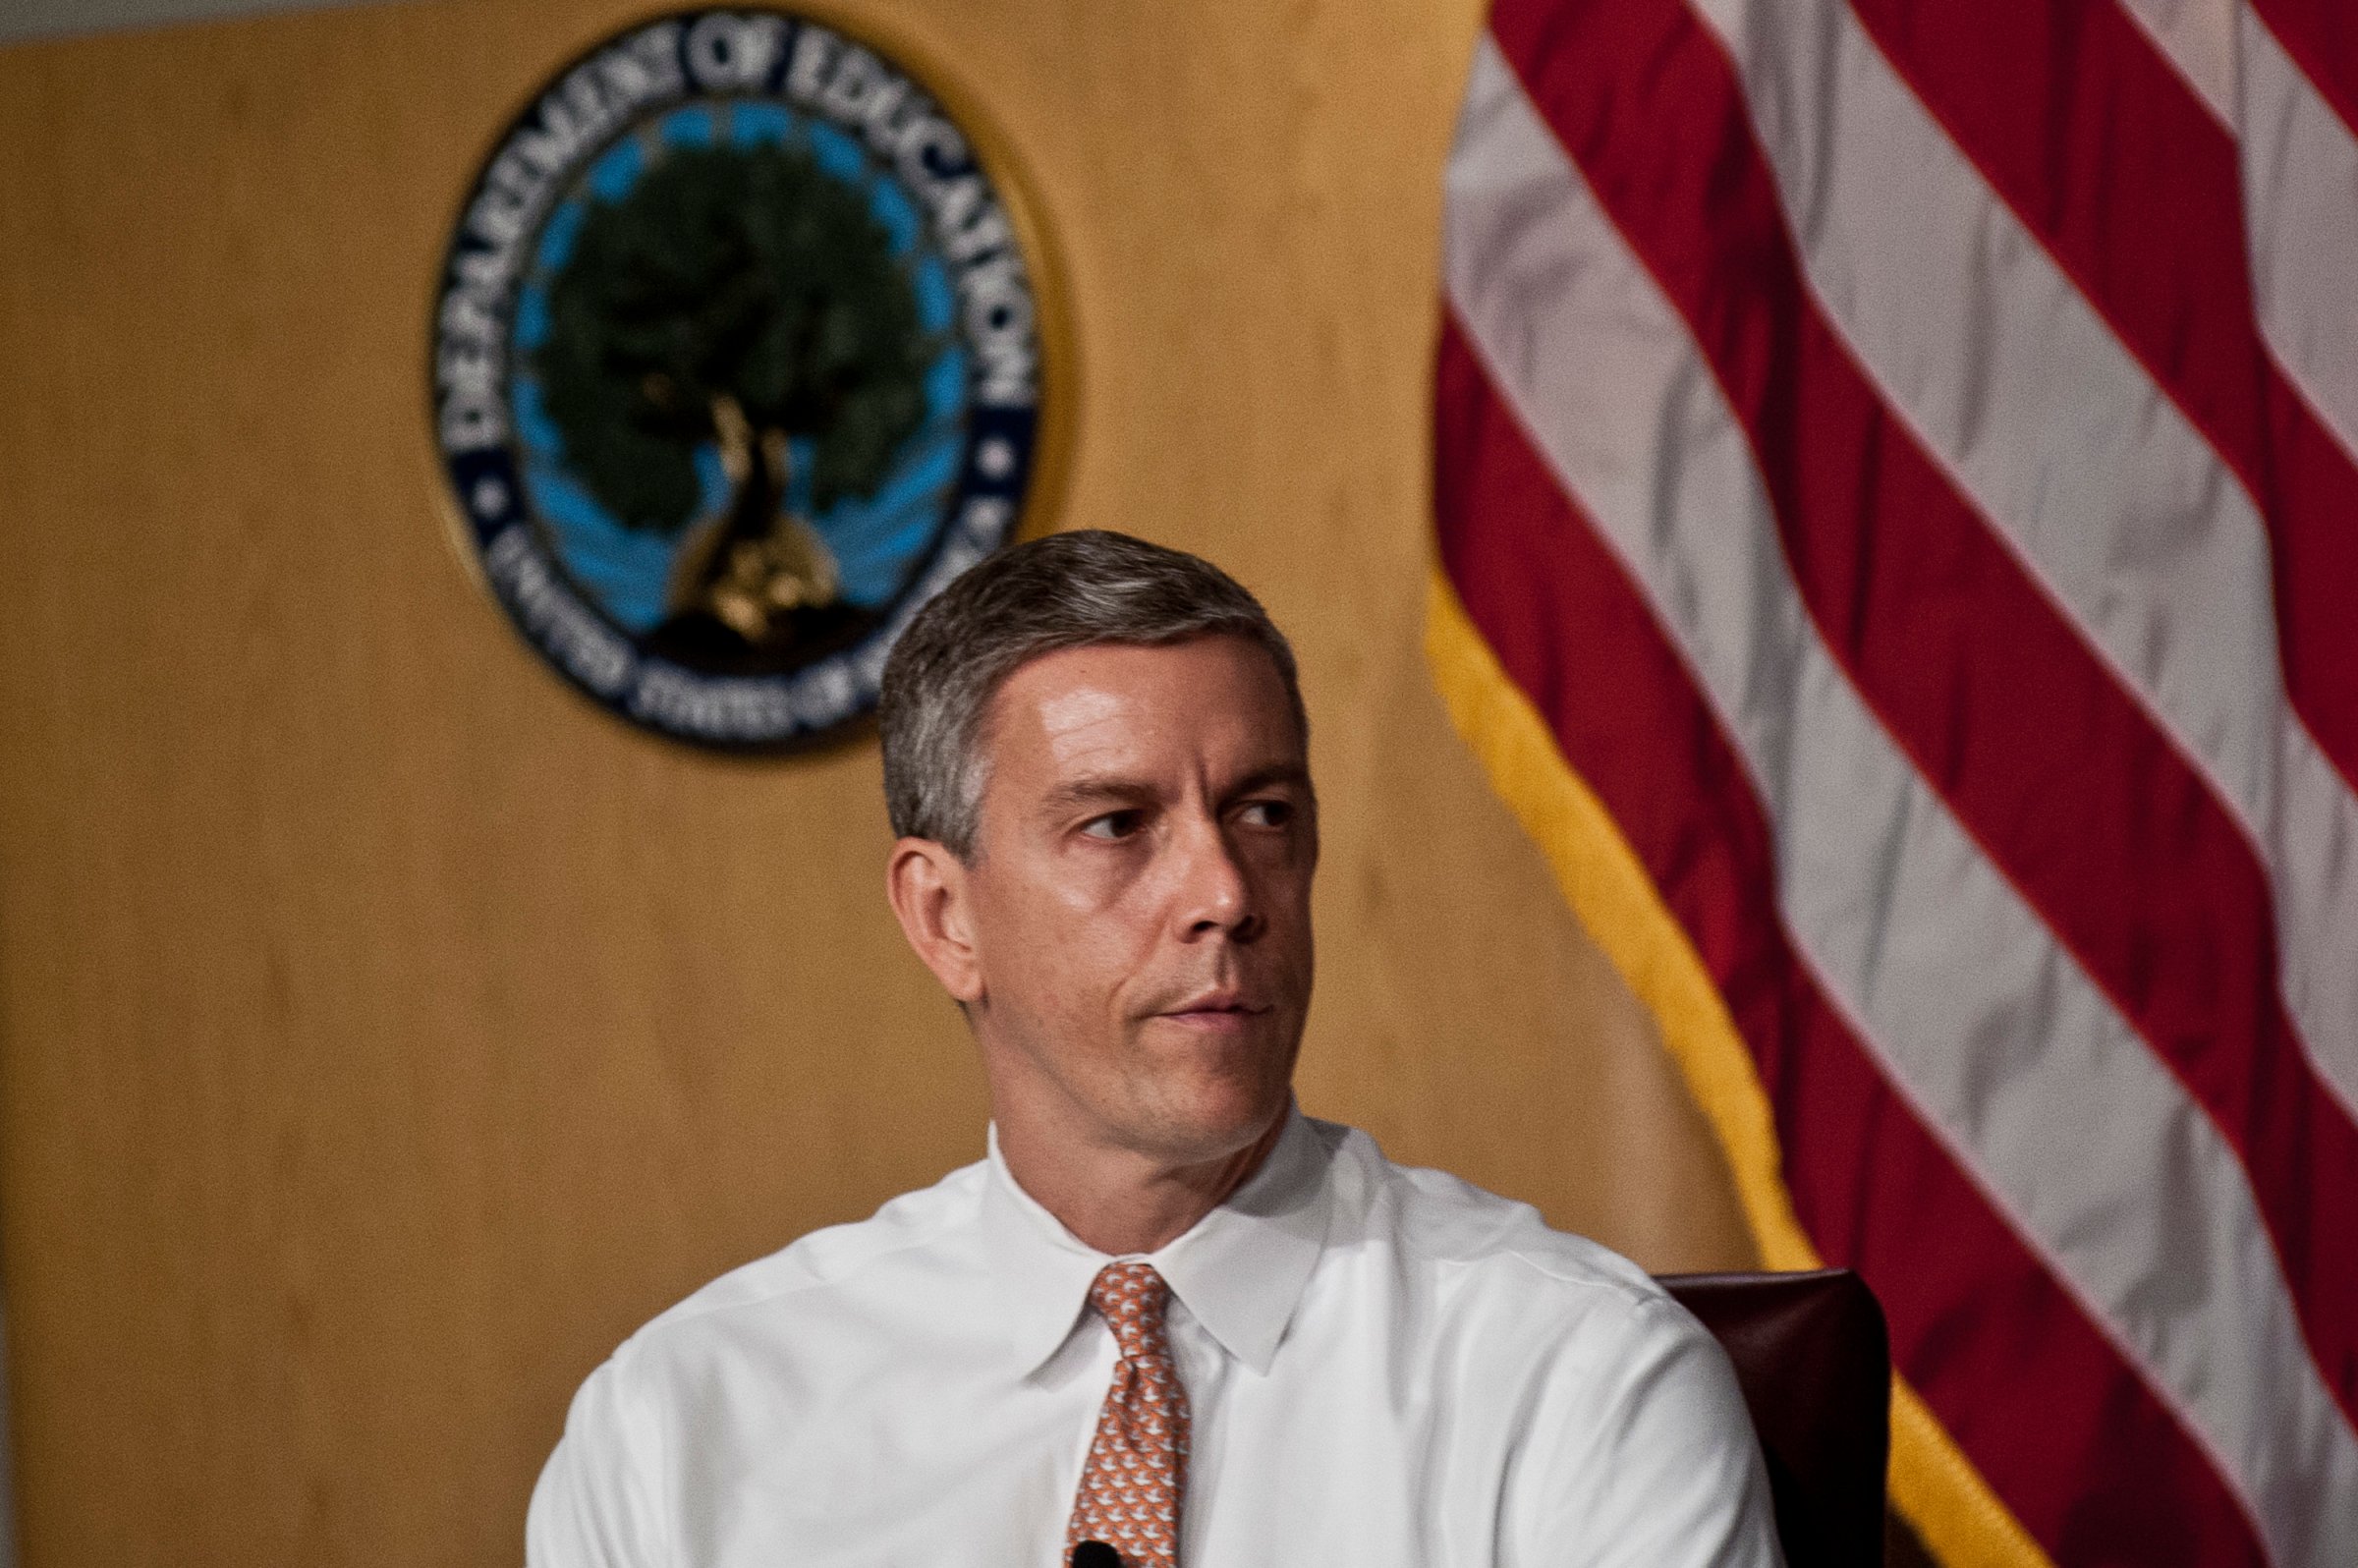 Arne Duncan at the "Let's Read. Let's Move" summer reading event series in Washington on July 18, 2012.